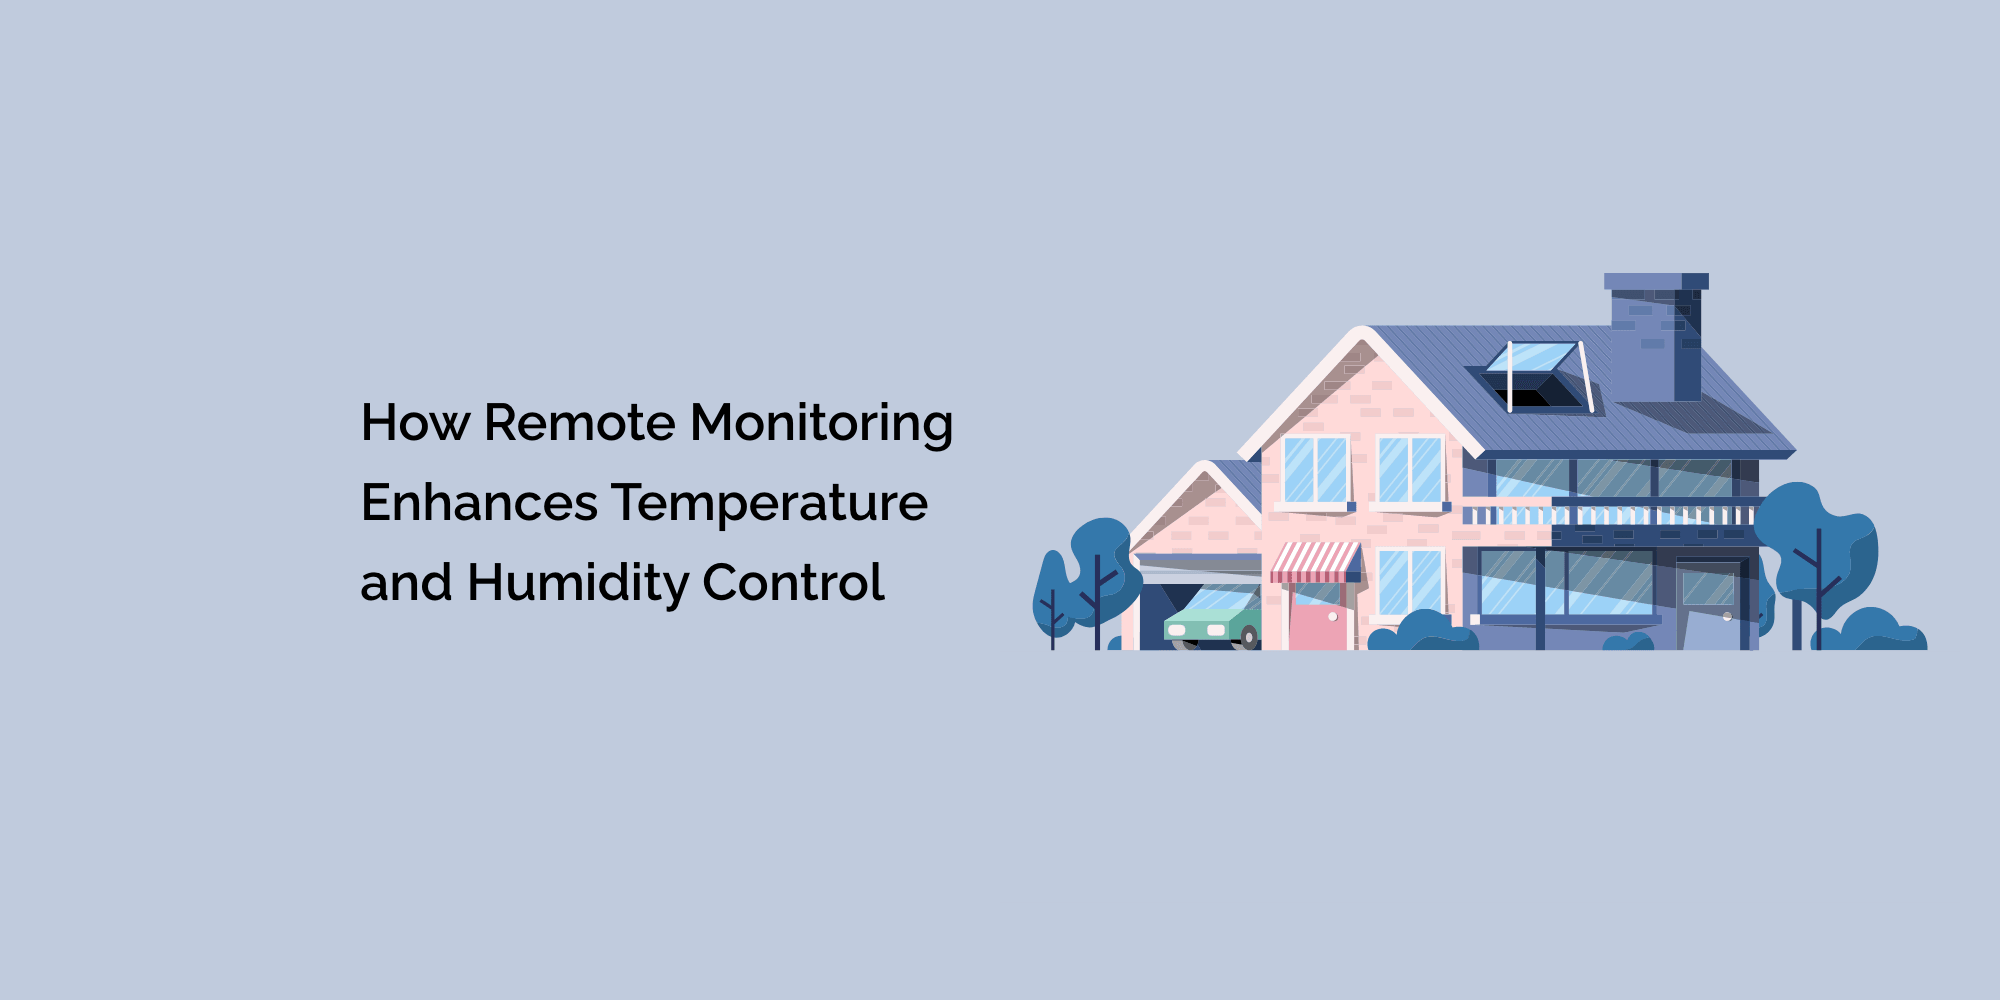 How Remote Monitoring Enhances Temperature and Humidity Control